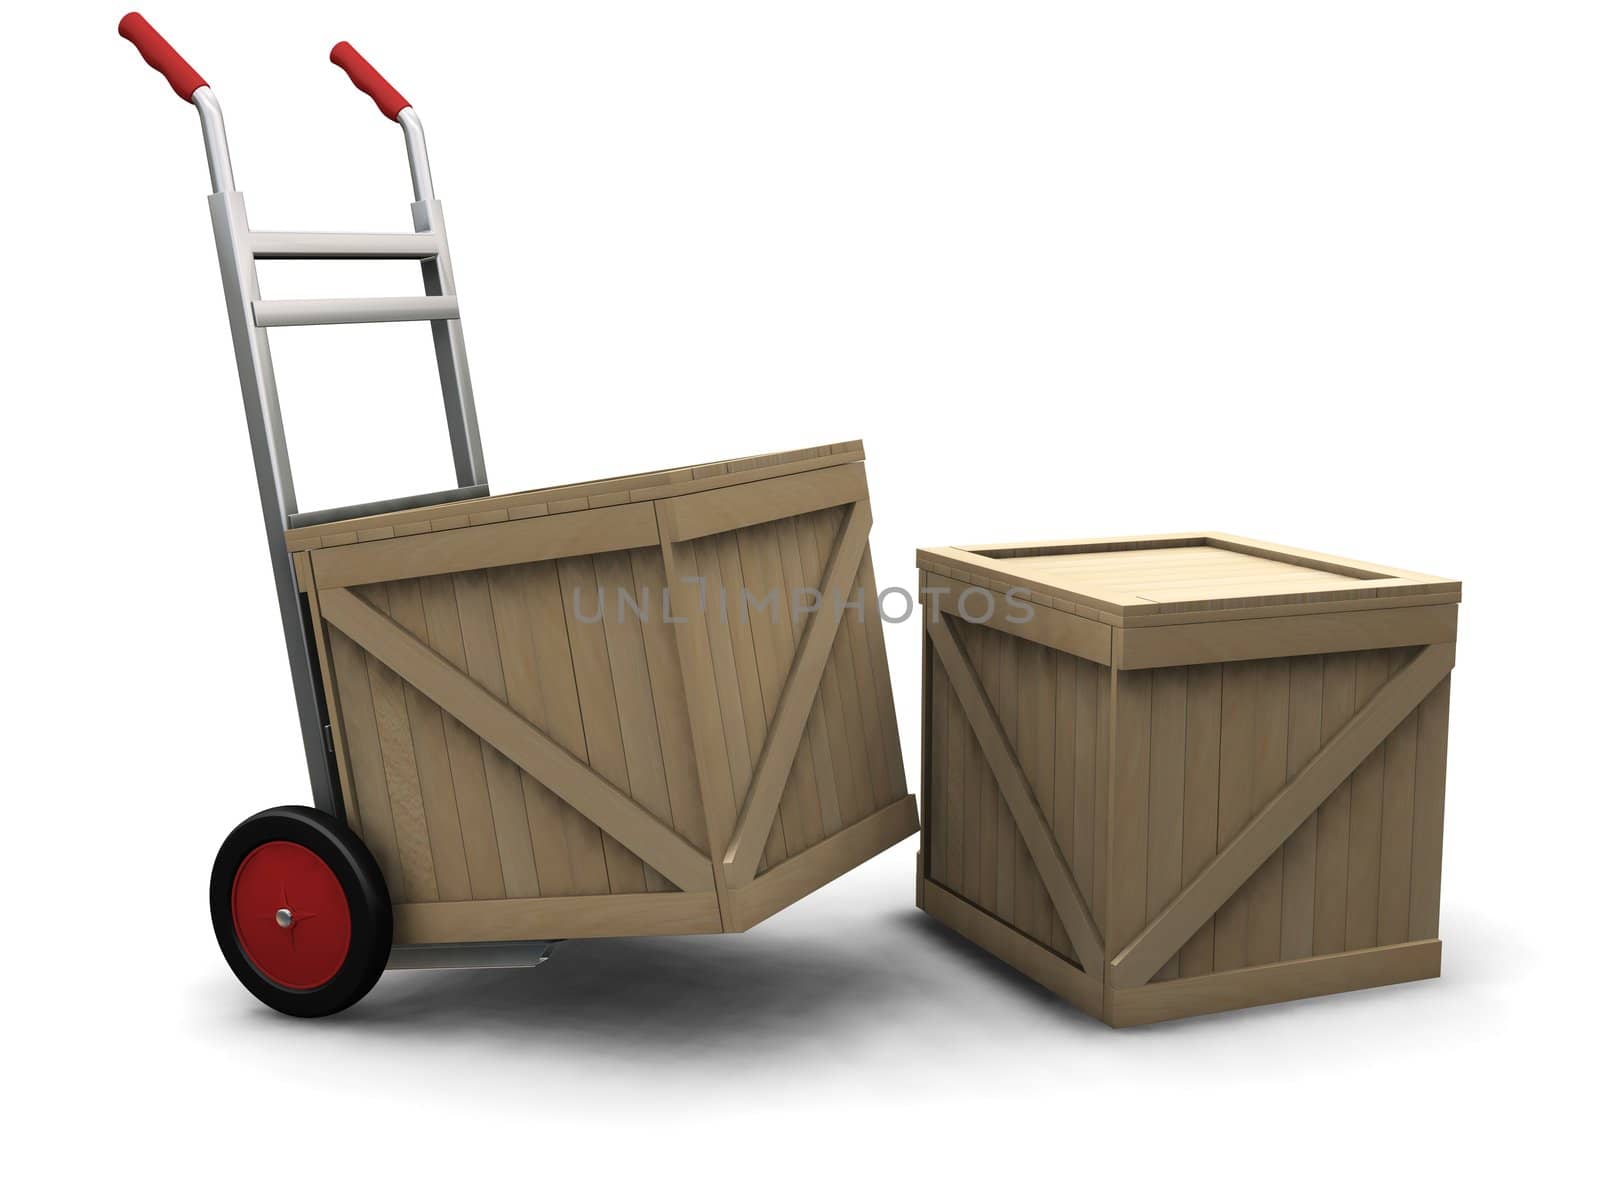 3D render of a hand truck with crates